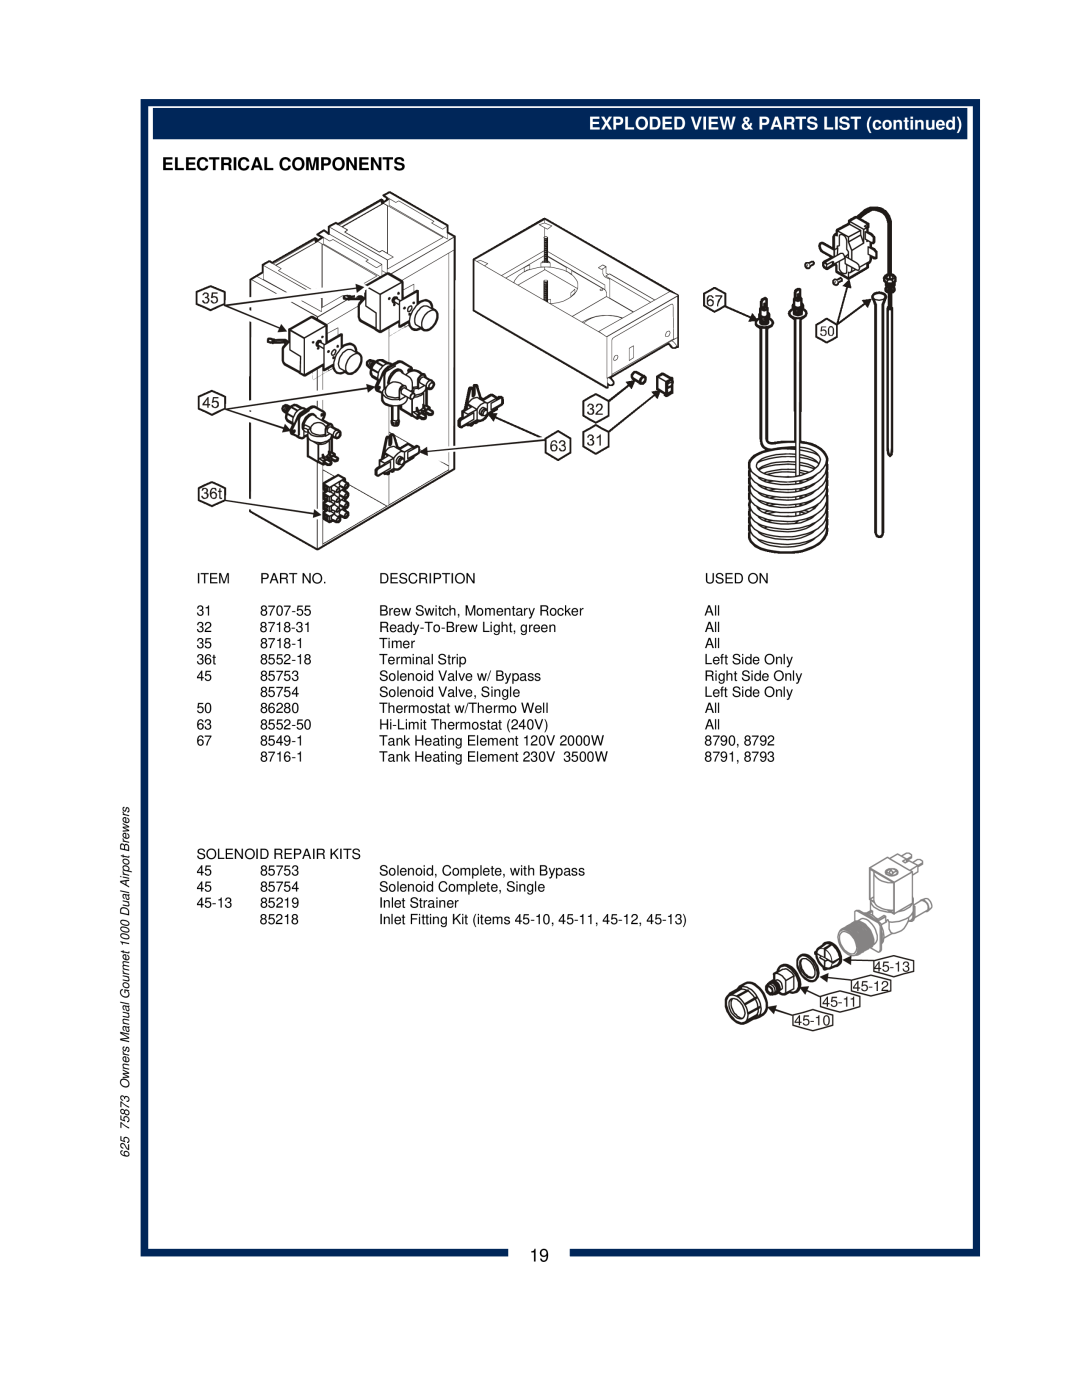 Bloomfield 8792 owner manual EXPLODED VIEW & PARTS LIST continued, Electrical Components, 45-13 